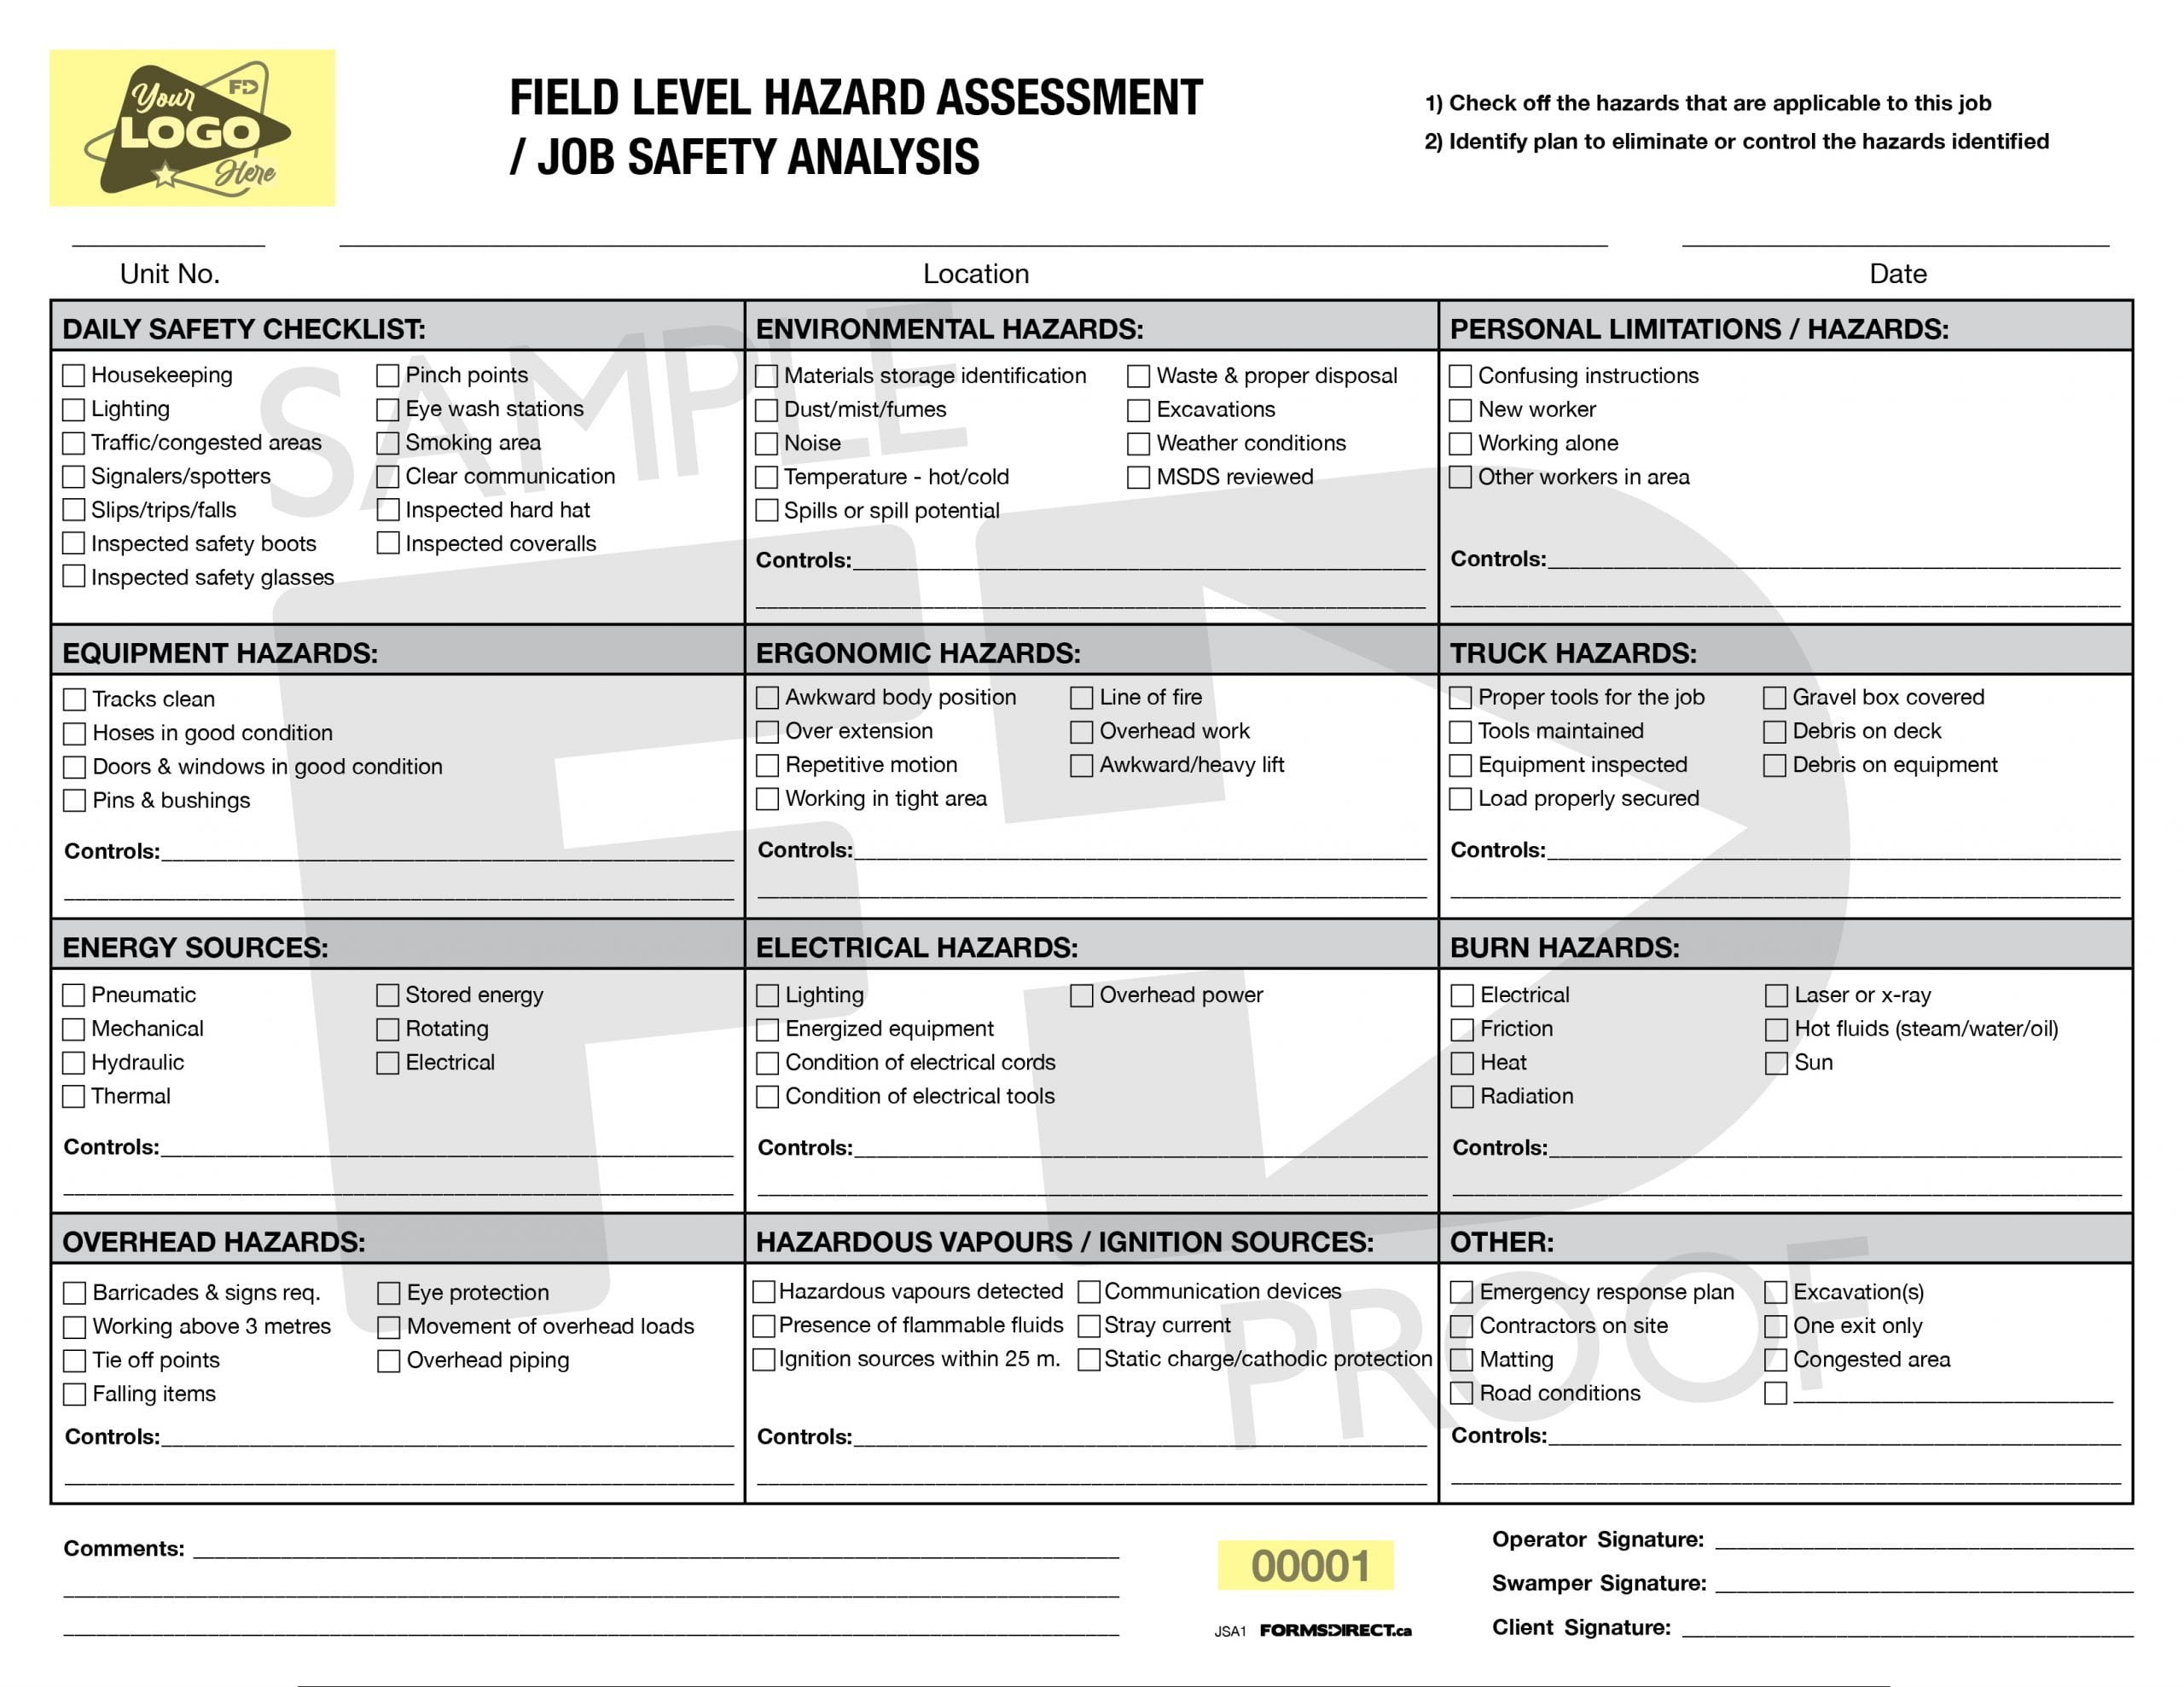 Job Safety Analysis Jsa1 Custom Form Template Forms Direct